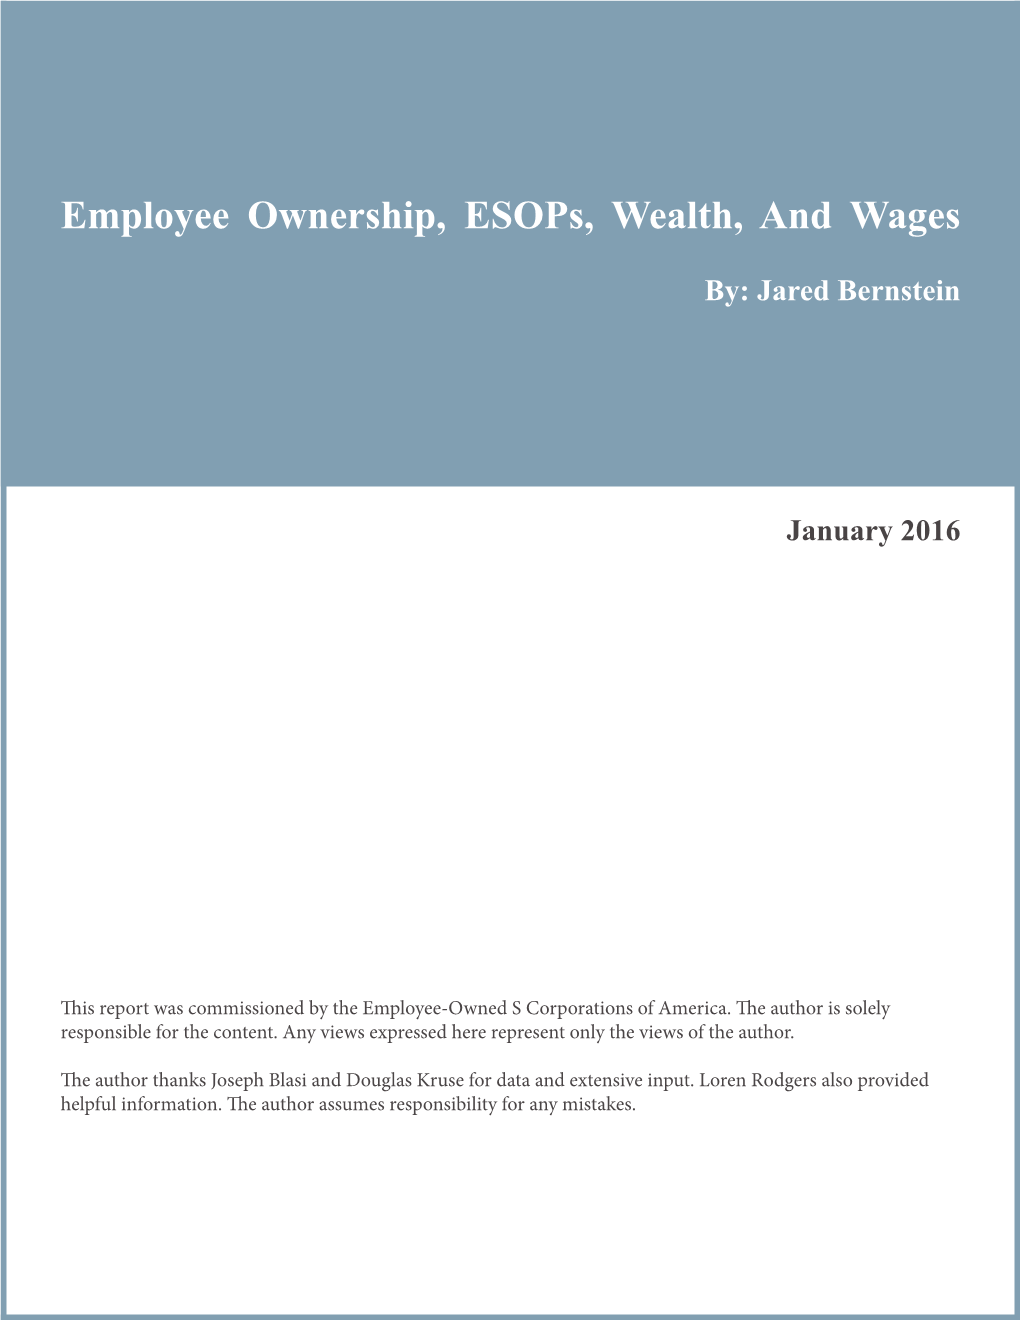 Employee Ownership, Esops, Wealth, and Wages